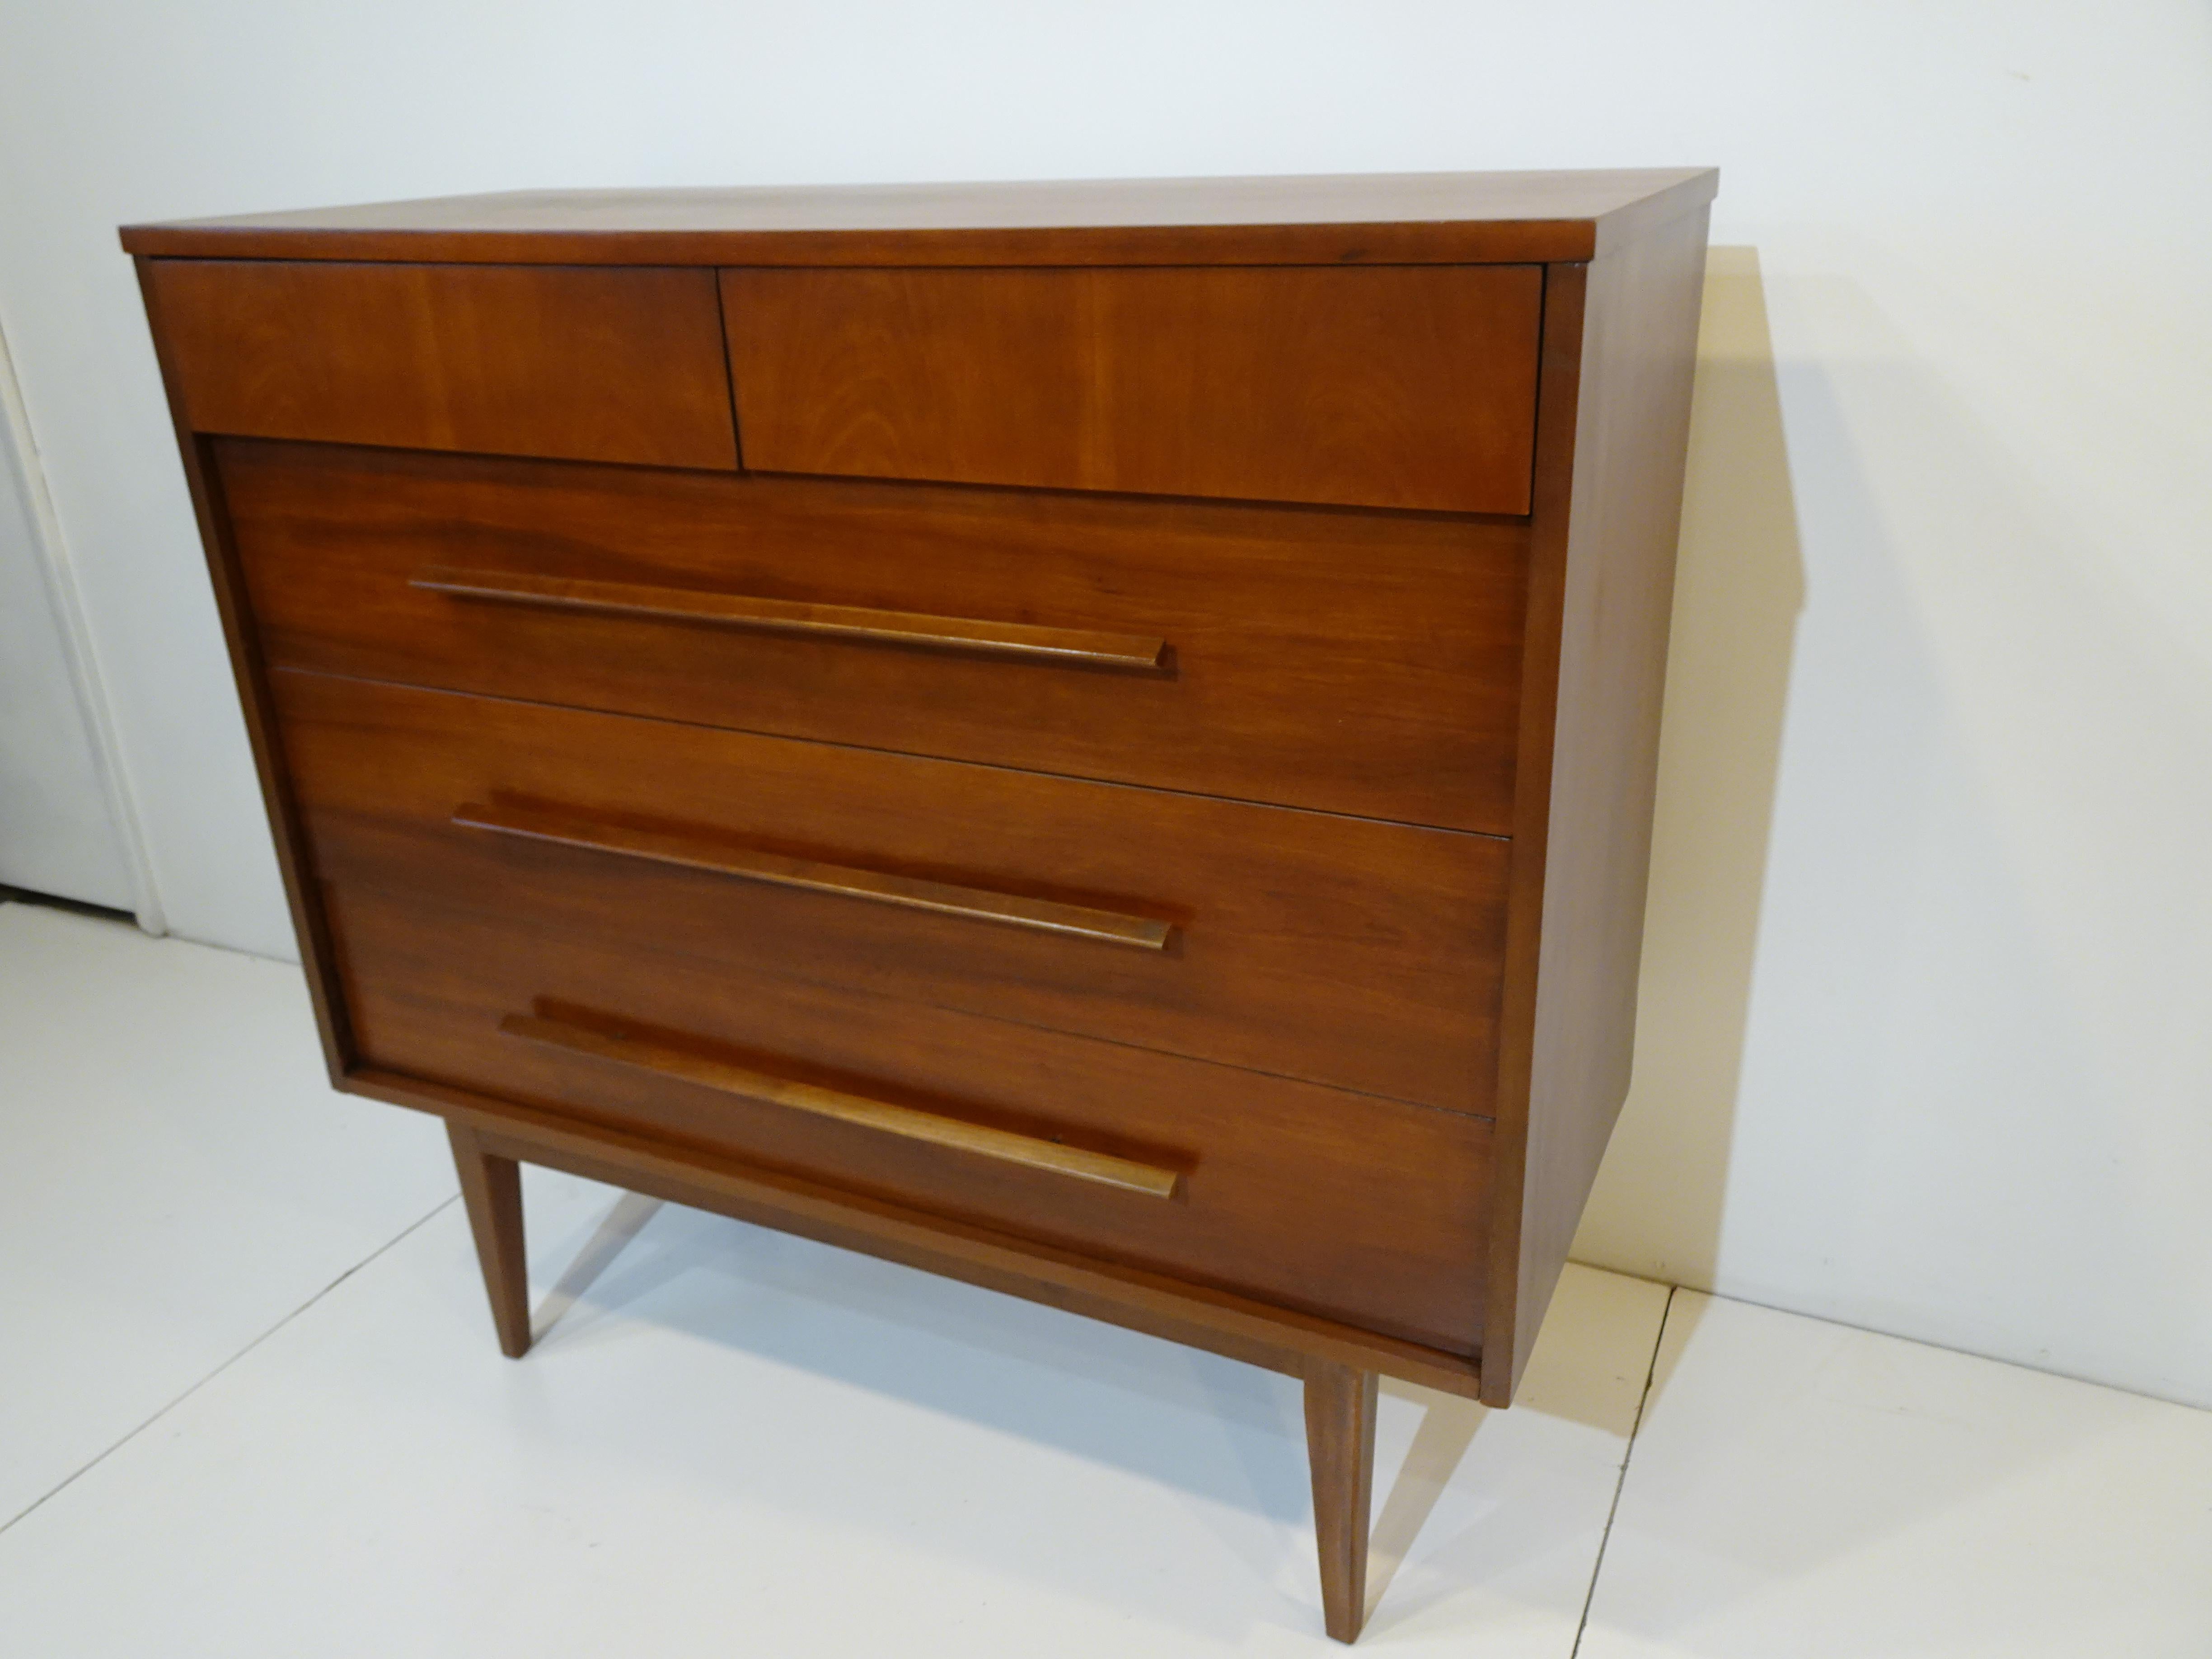 A nice dark walnut mid century dresser with two thin smaller upper drawers and three larger lower drawers with matching long streamline pull handles. A very clean design that works well with many different decors having plenty of storage and would